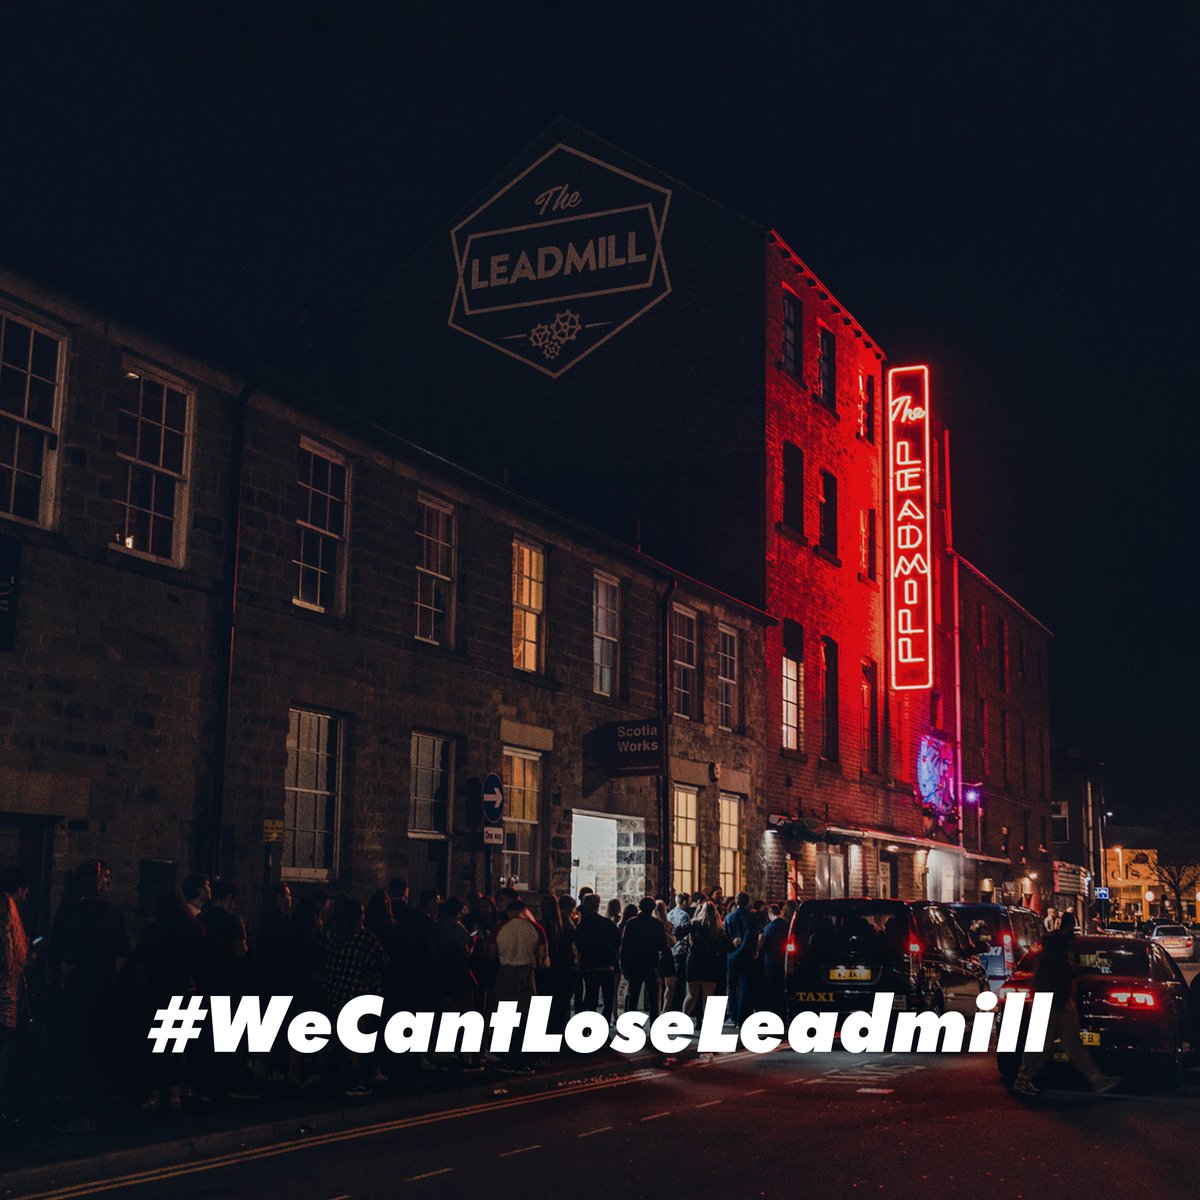 Today we have received some devastating news that in 1 year's time, our Landlord is evicting us and forcing us to close. Please show your support by sharing this news & sending us your best memories that we can gather to help display all the reasons why #WeCantLoseLeadmill